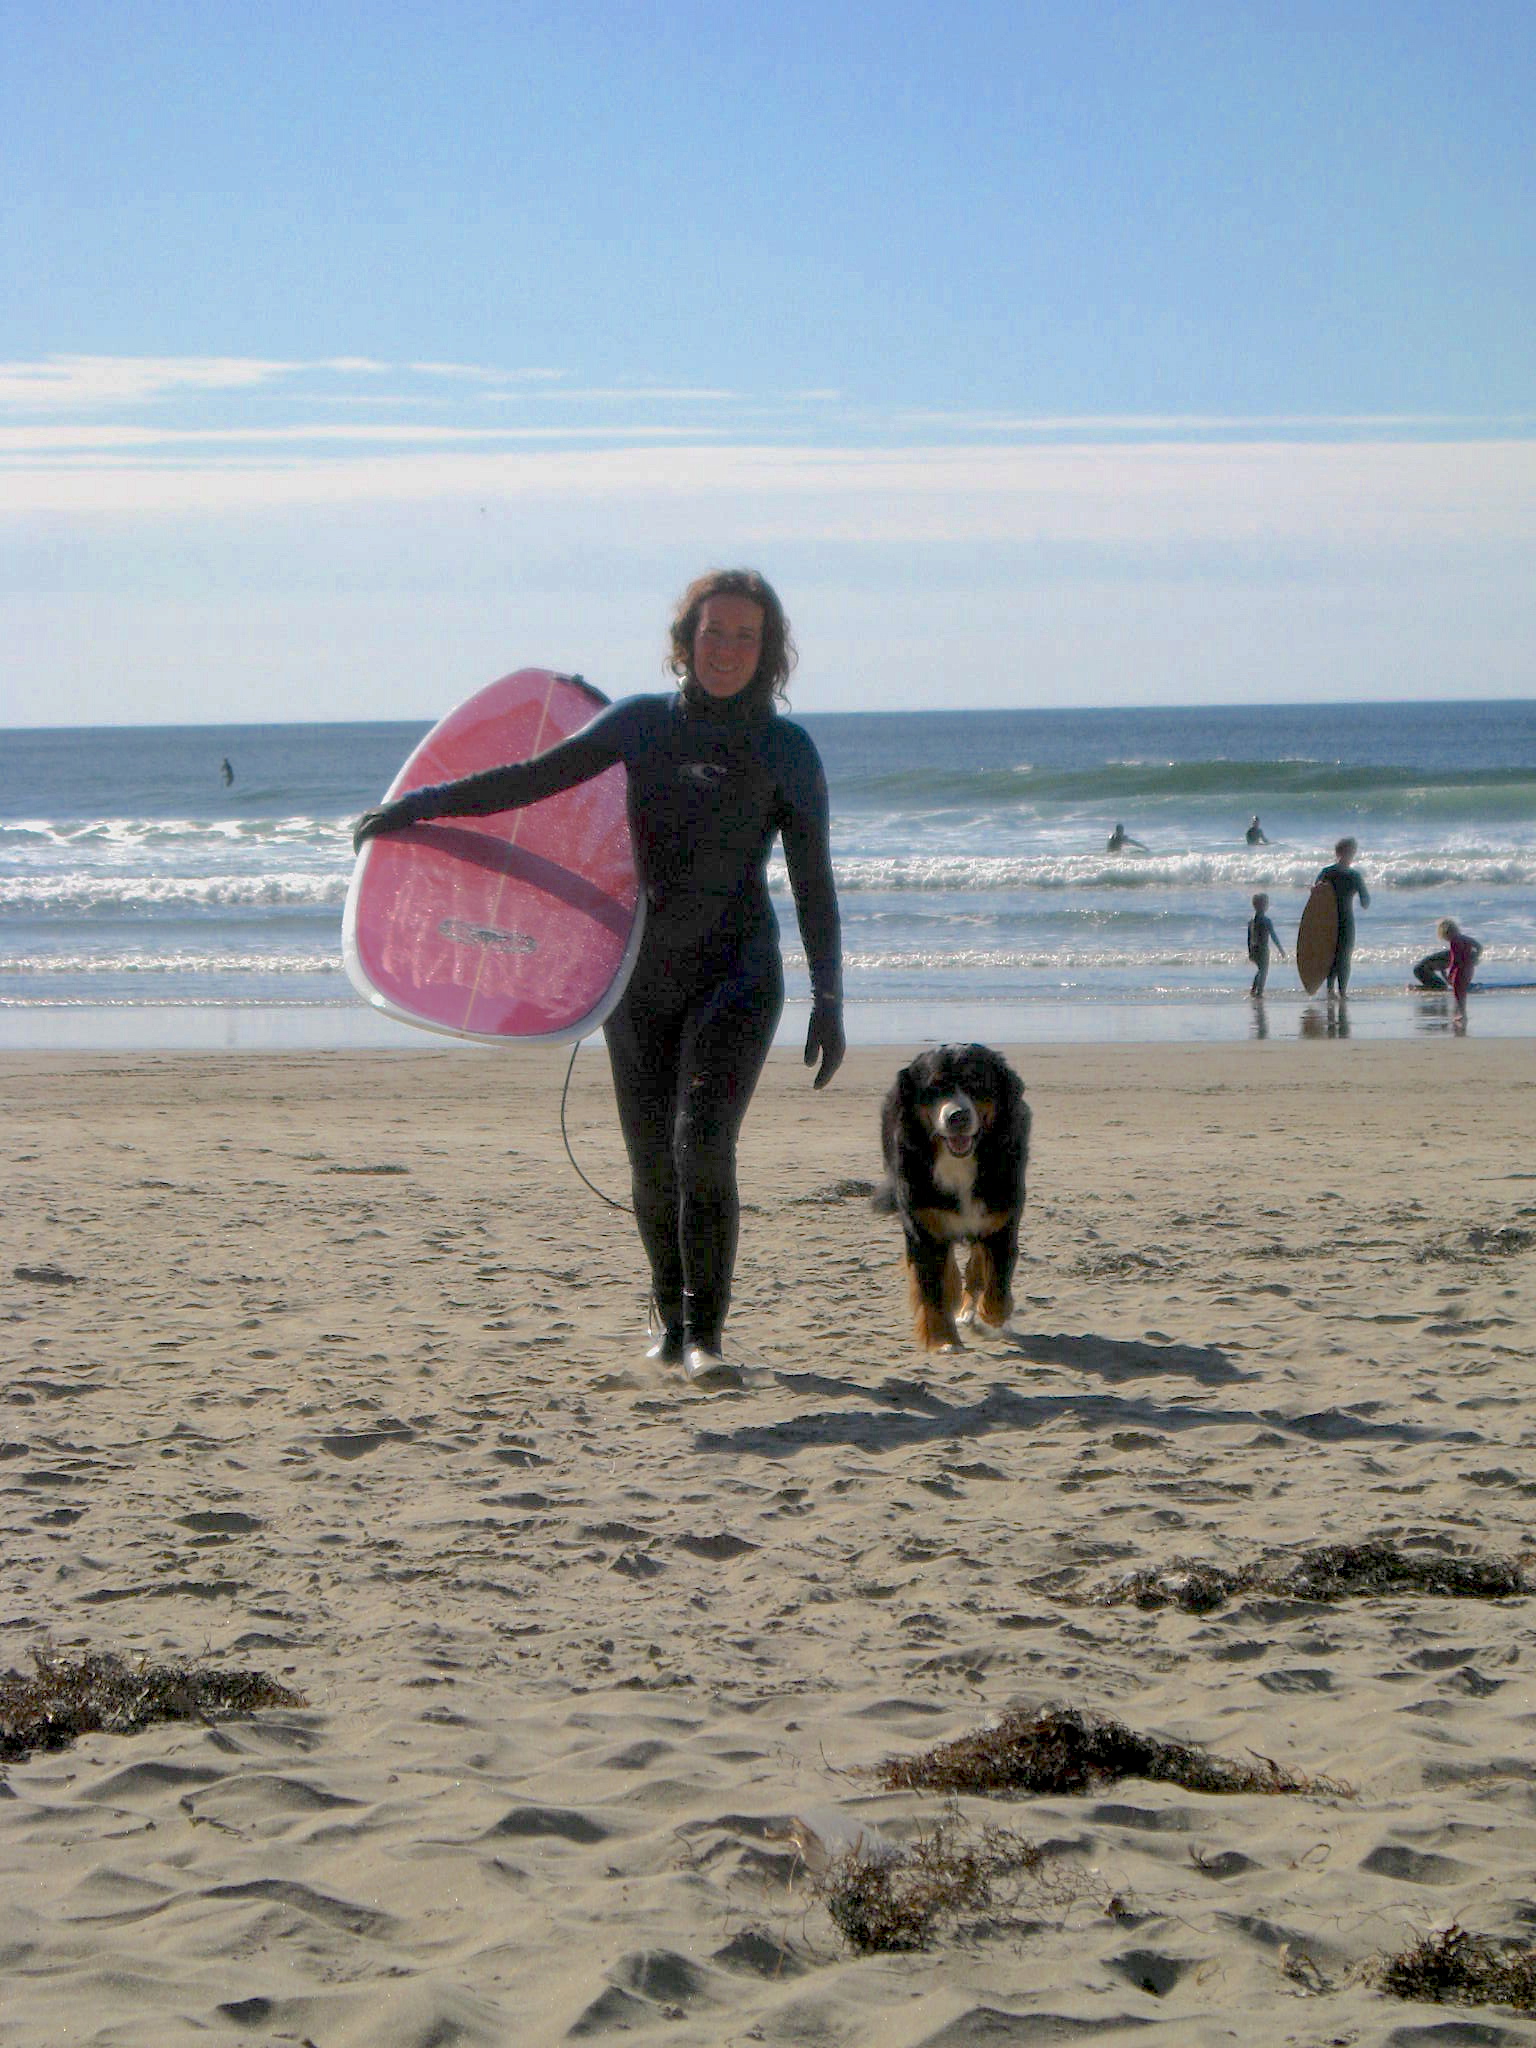 Ariel Frager with surfboard and dog.